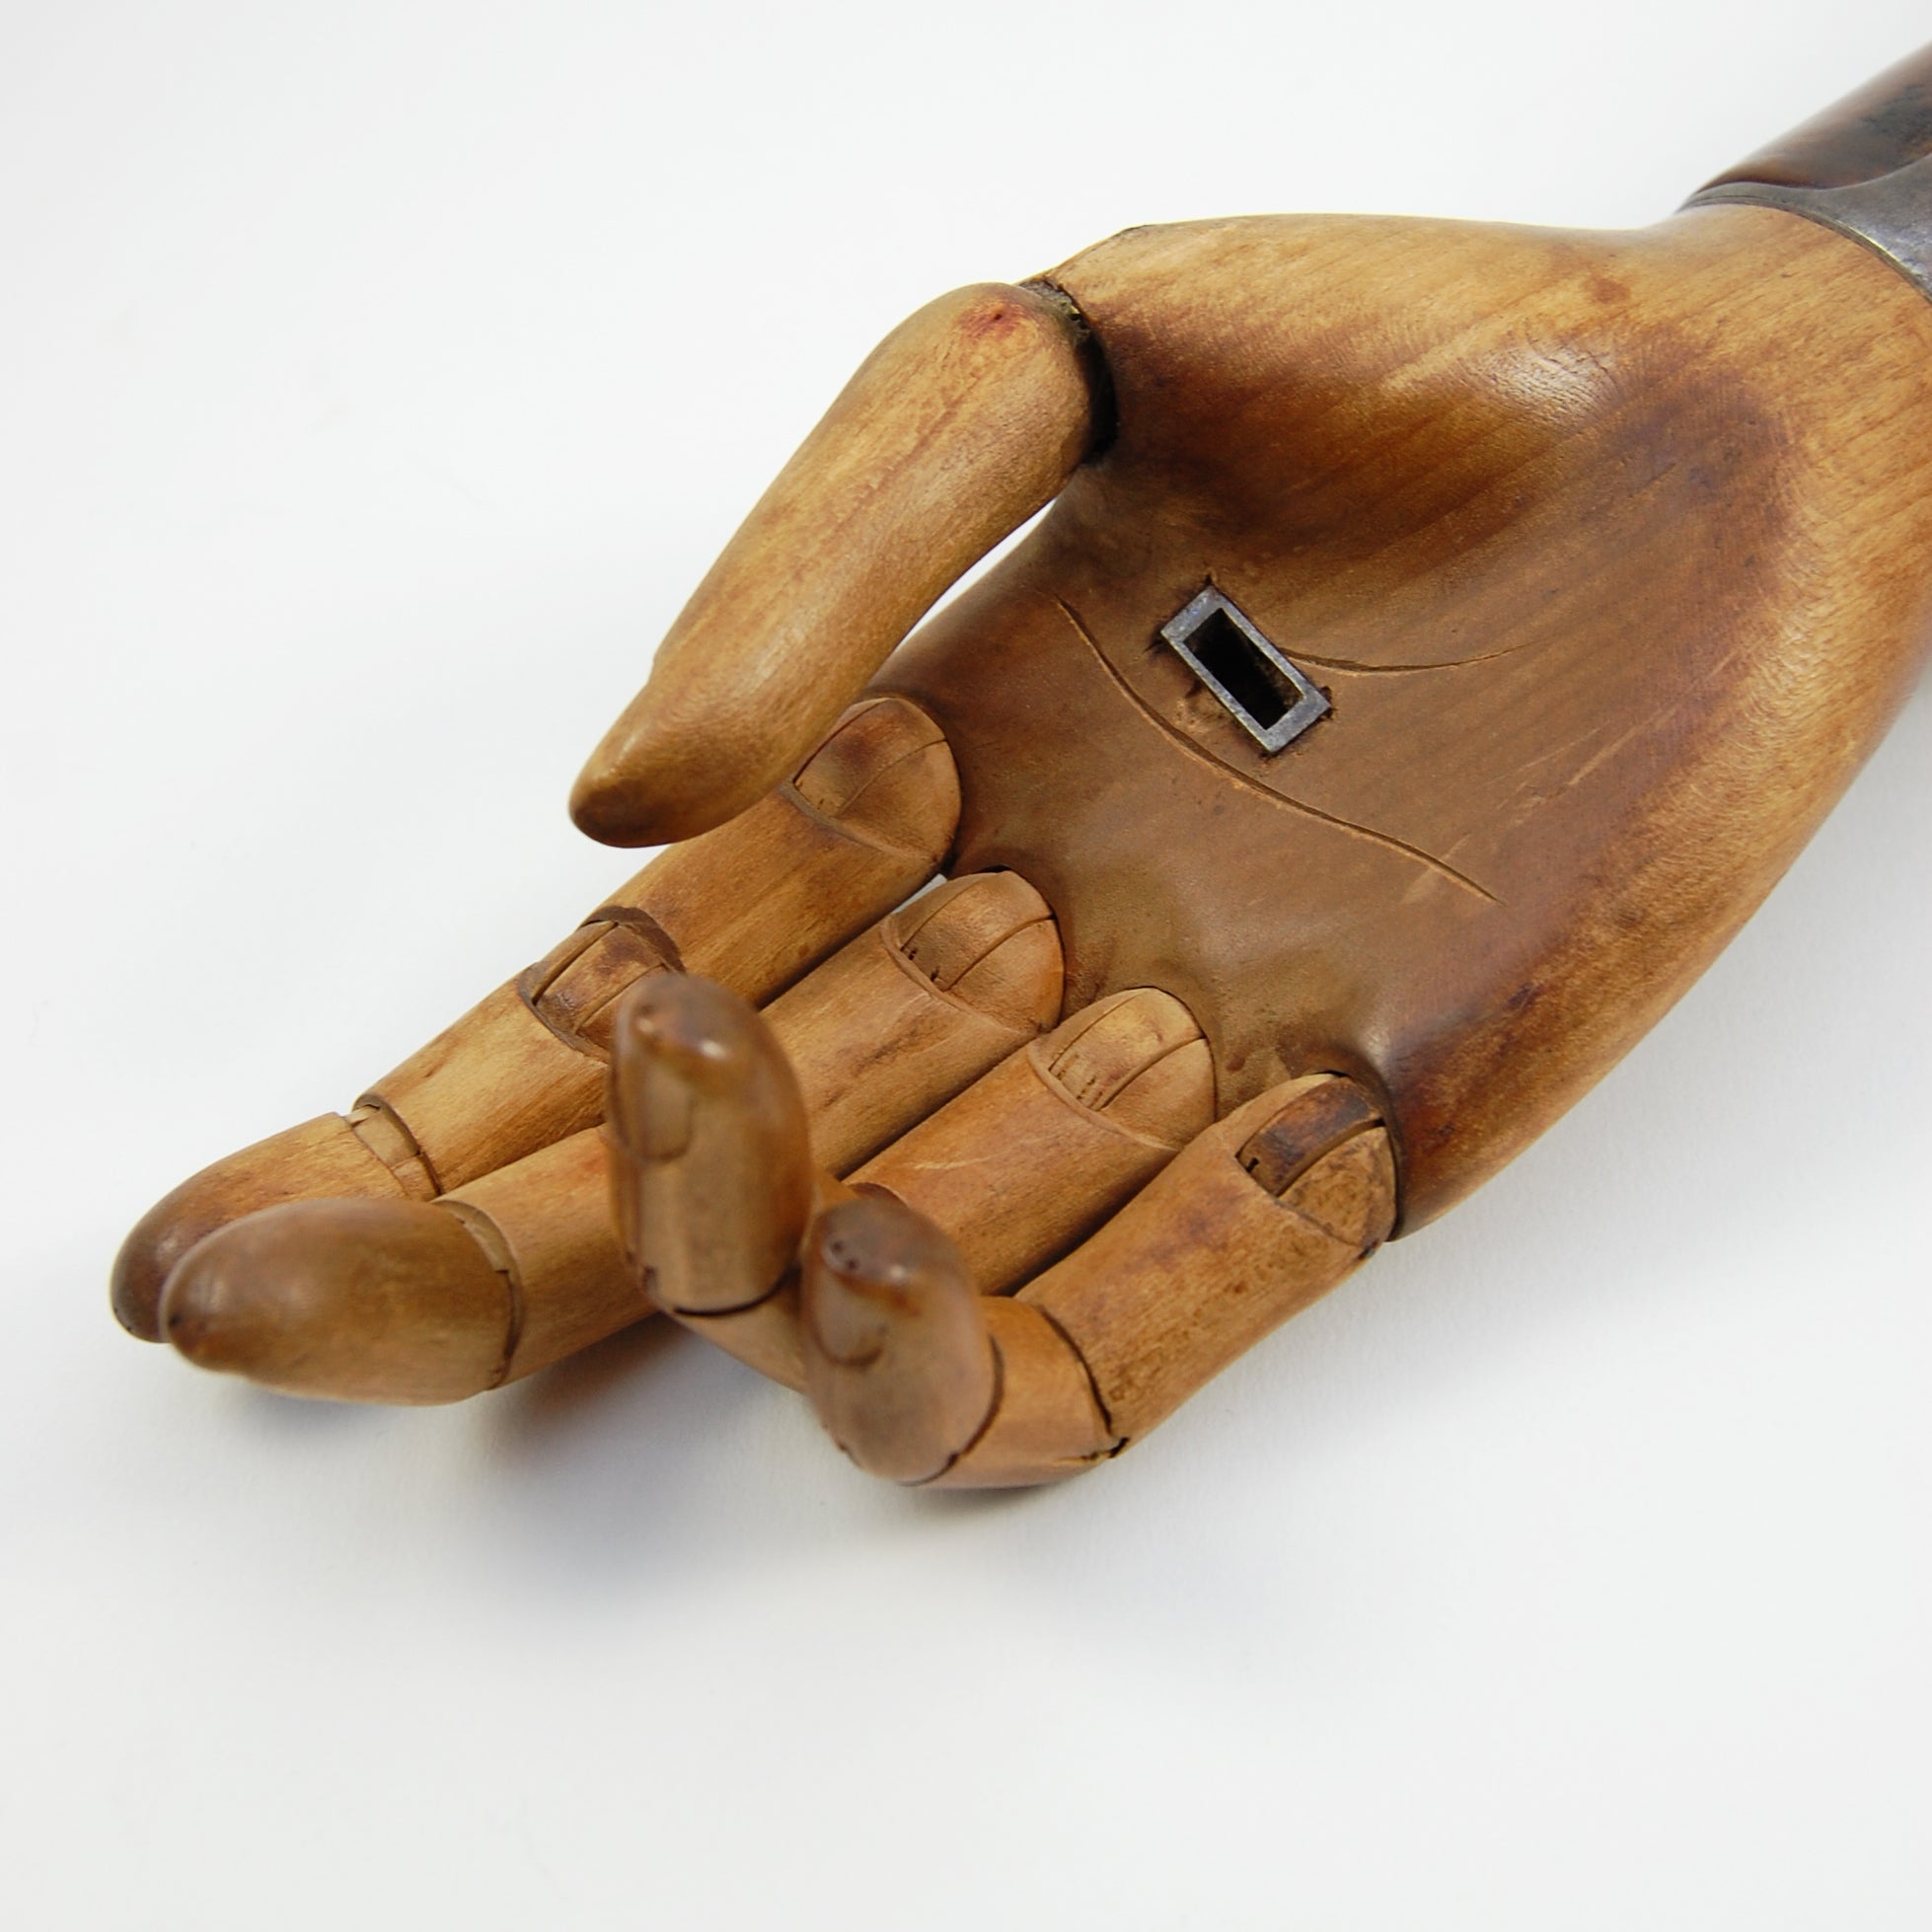 A Rare Victorian Prosthetic Hand by J. Gillingham & Son - Alembic Rare Books